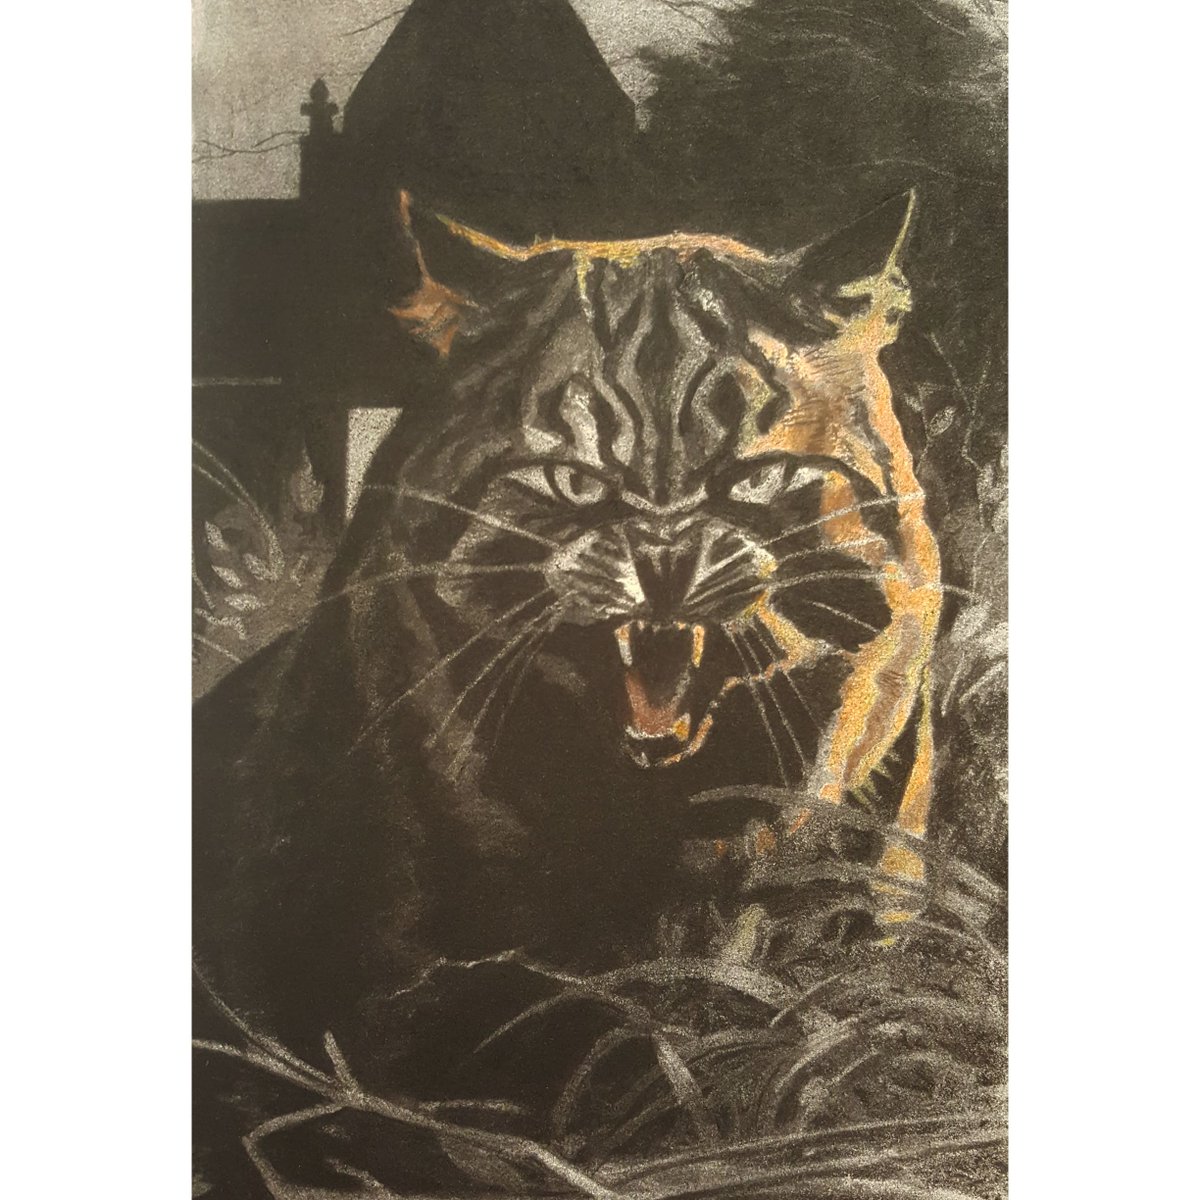 Good Boy of Wales - Charcoal + coloured pencils

#wildcat #victoriangothic #cat #charcoaldrawing